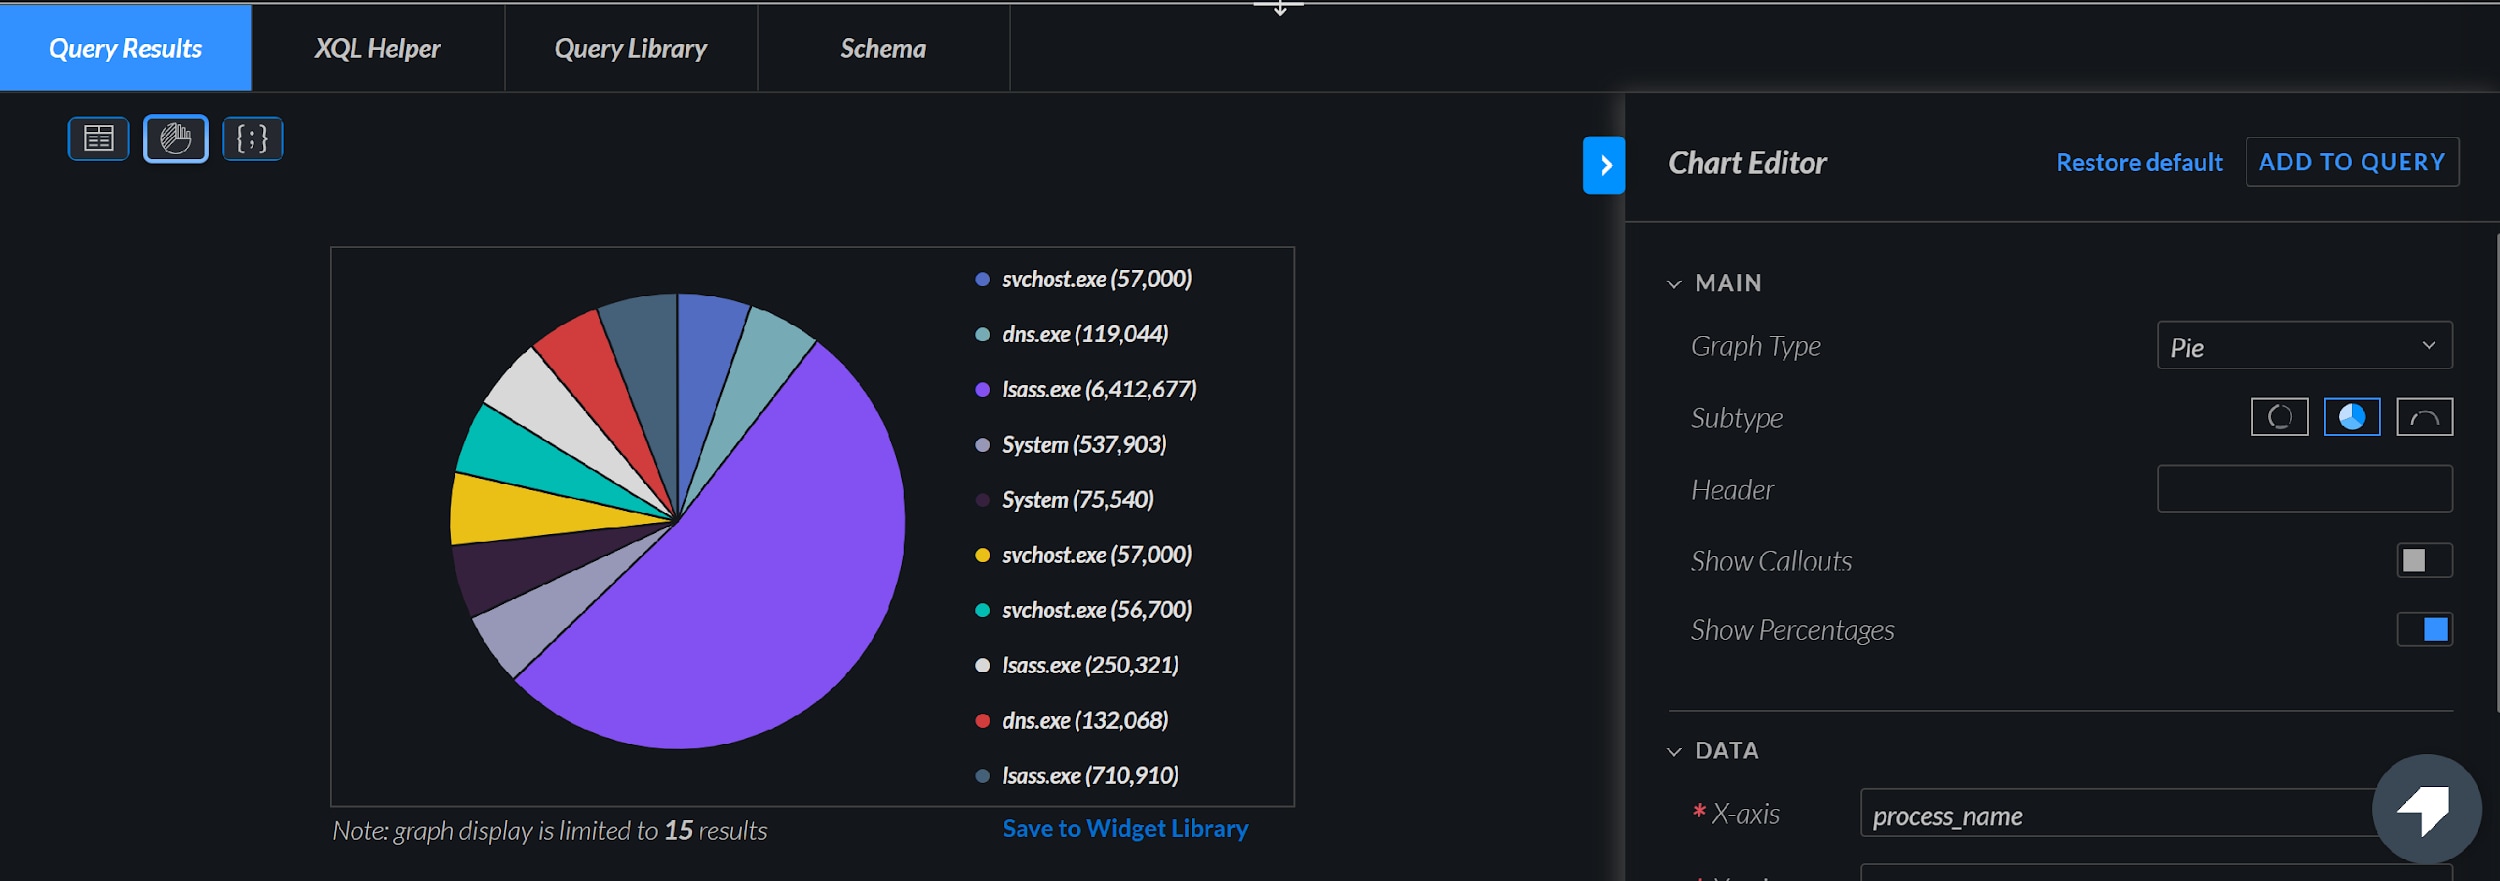 Cortex XDR 2.7 now includes custom pie charts, as shown in this screenshot, that help analysts quickly identify top search results, easing investigations.